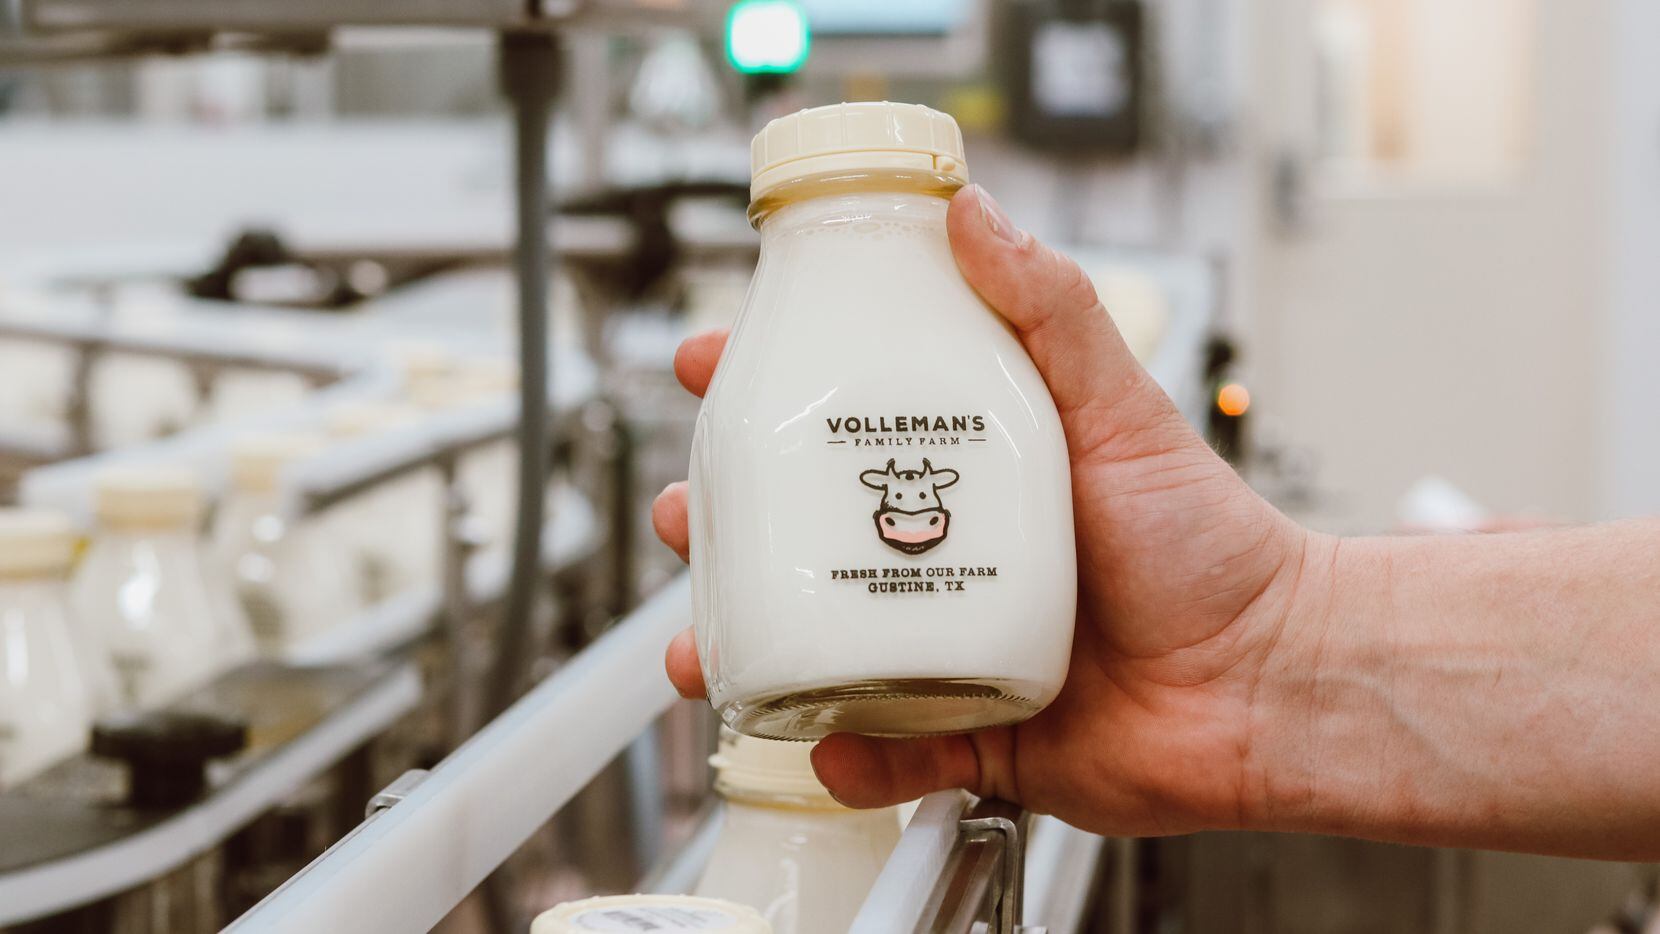 Central Market - If you drink cow's milk, then Volleman's Family